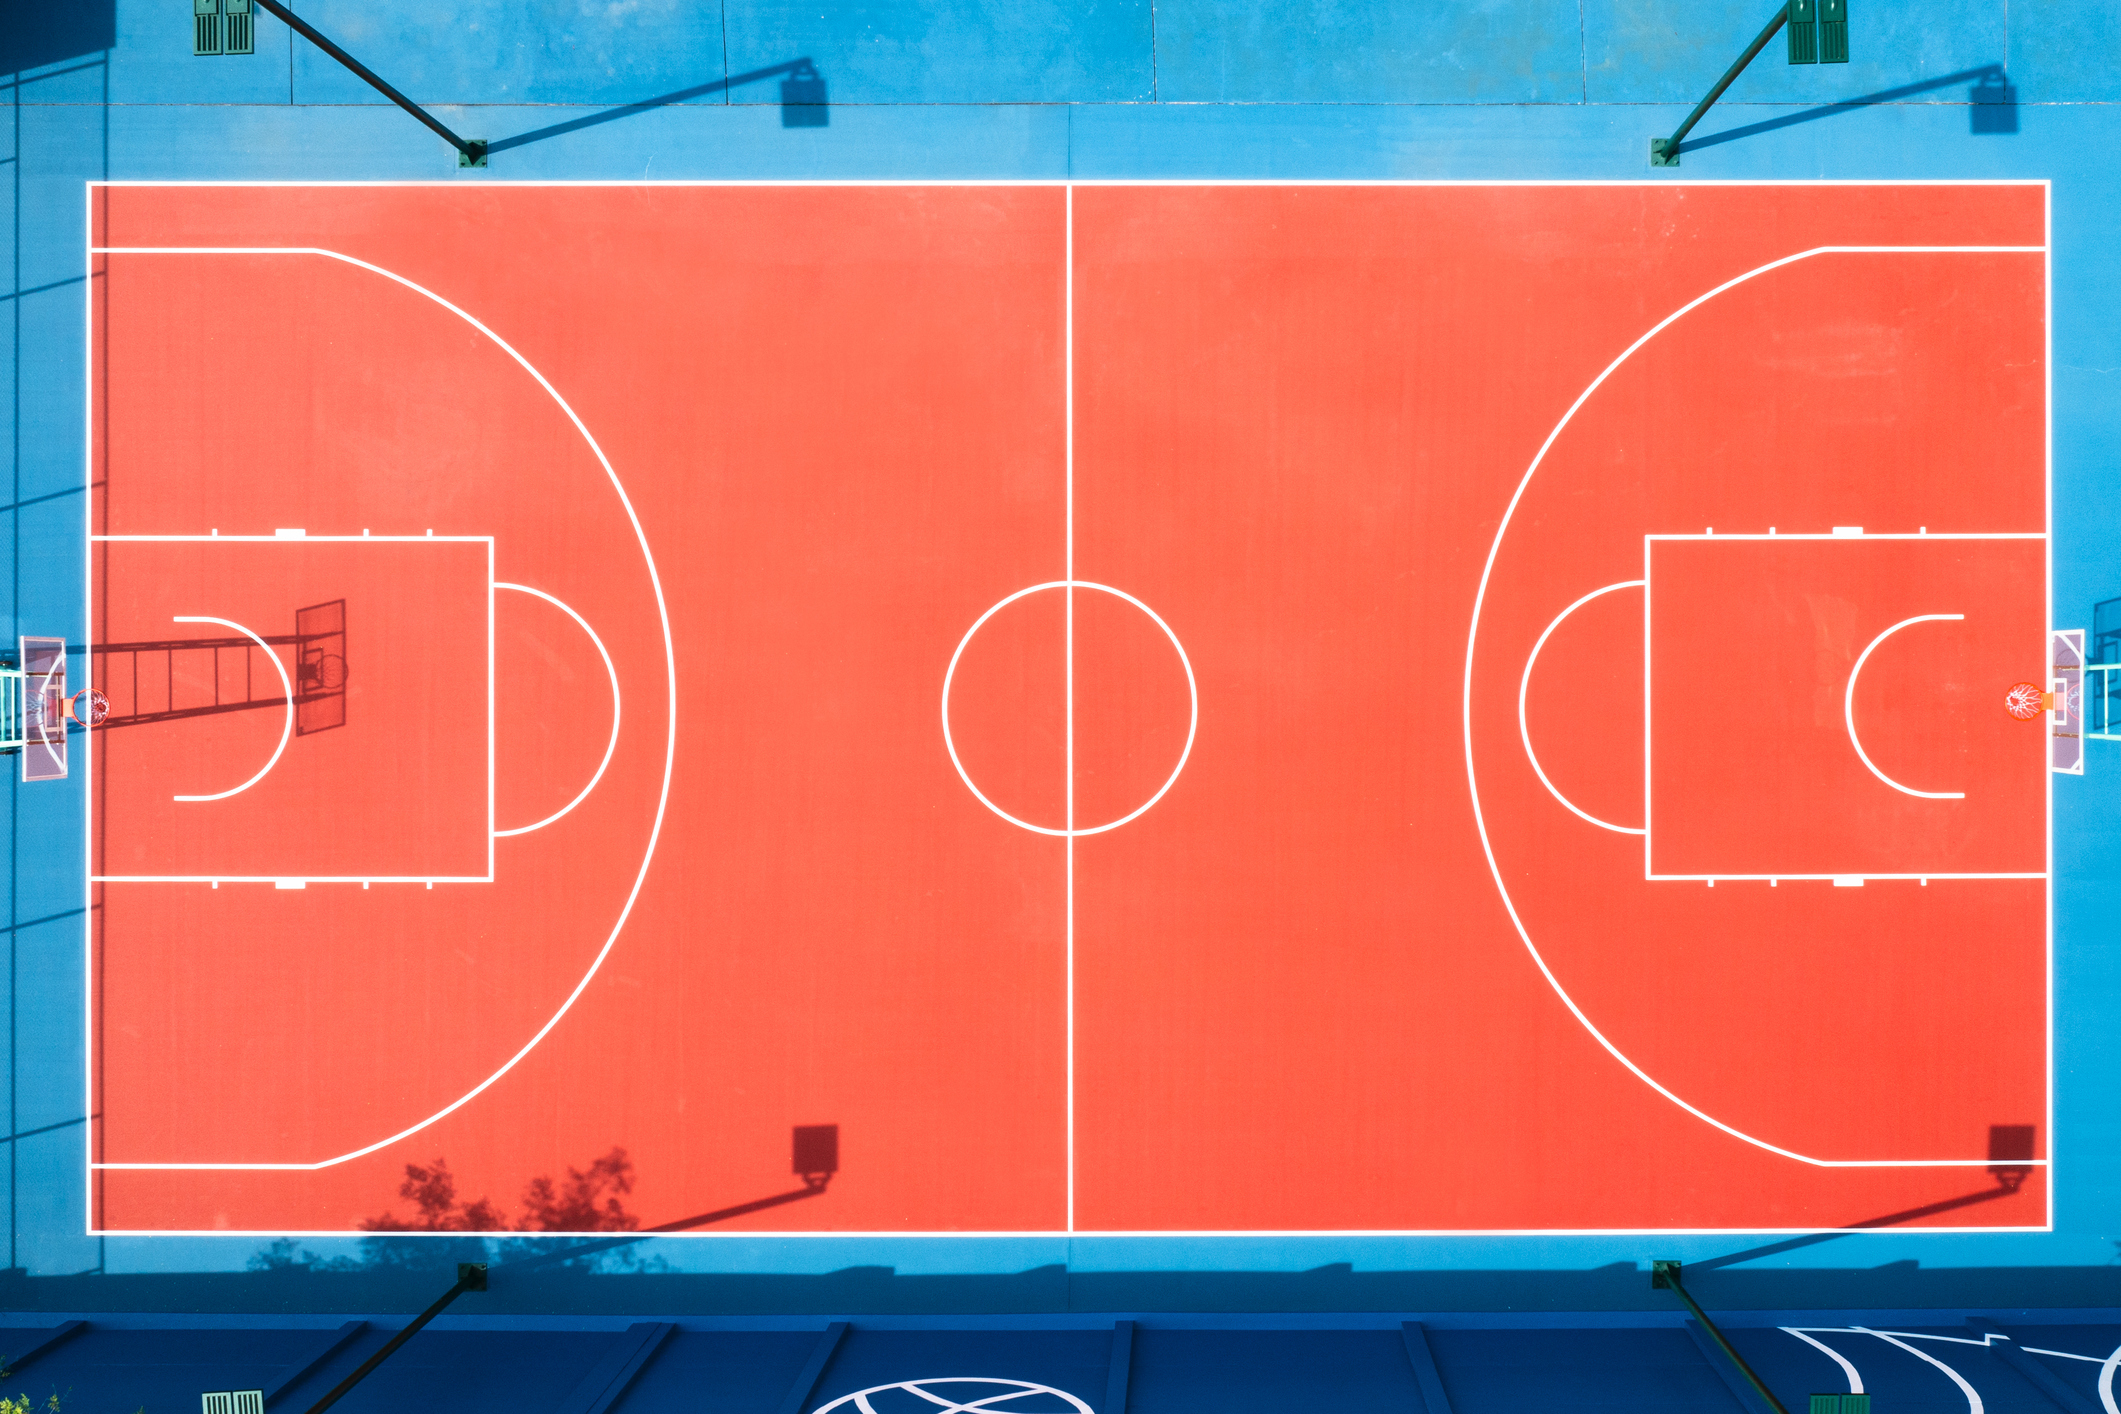 Aerial view of an empty basketball court with clear boundary lines and hoops at either end